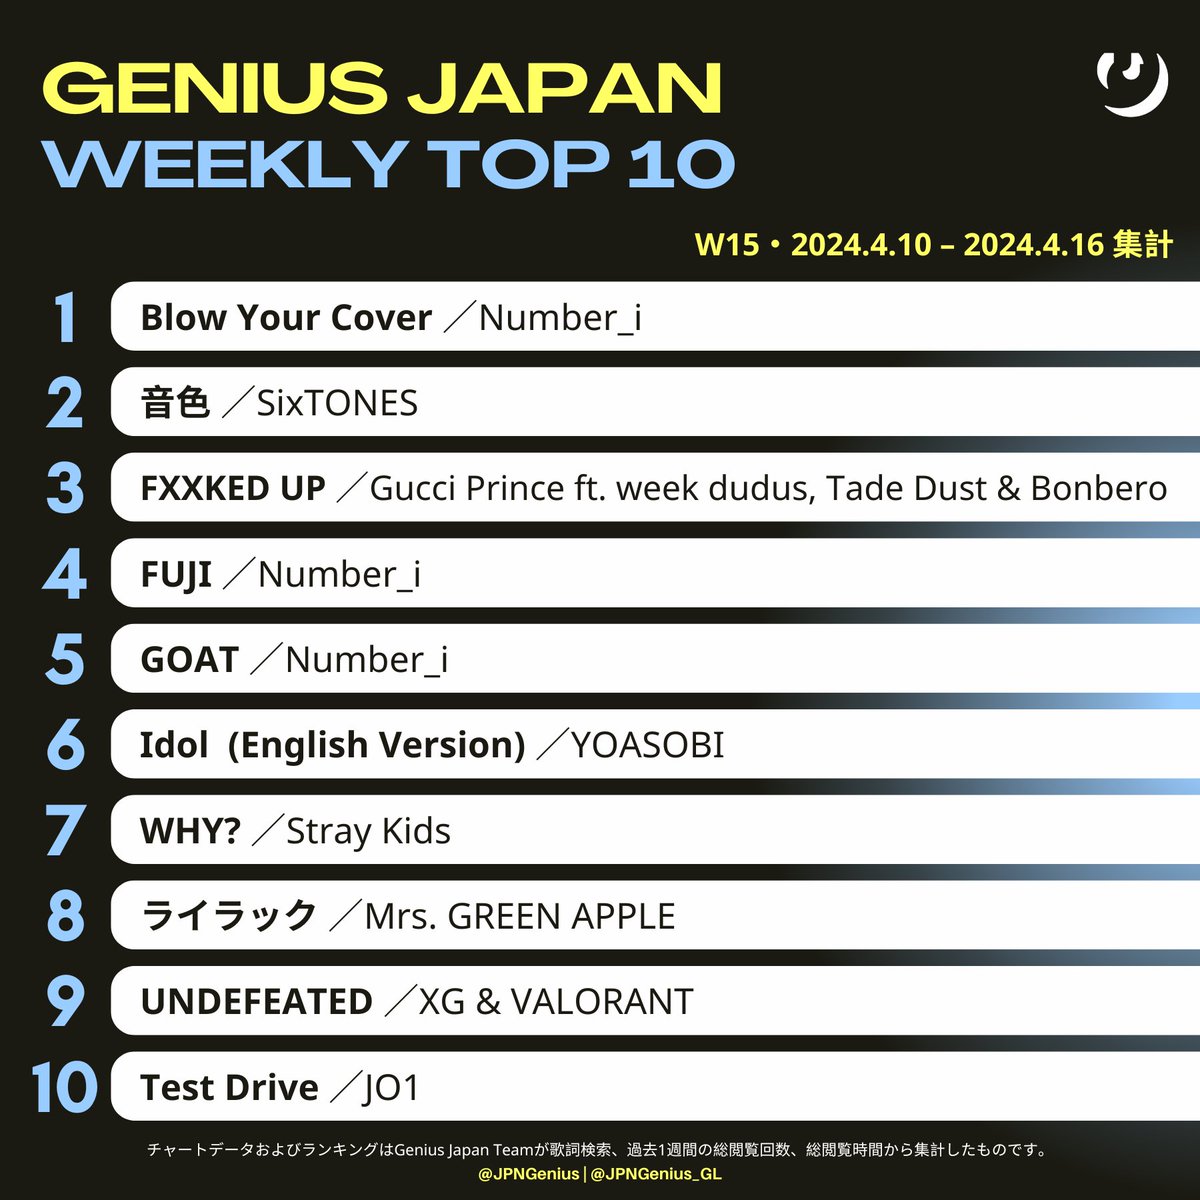 #GeniusCharts | Announcing this week's @Genius Japan TOP 10 Chart (Dated Apr 10–16, 2024／W15) 🥇Number_i - 'Blow Your Cover' 🥈SixTONES - 'Neiro' 🥉Gucci Prince ft. week dudus, Tade Dust & Bonbero - 'FXXKED UP'